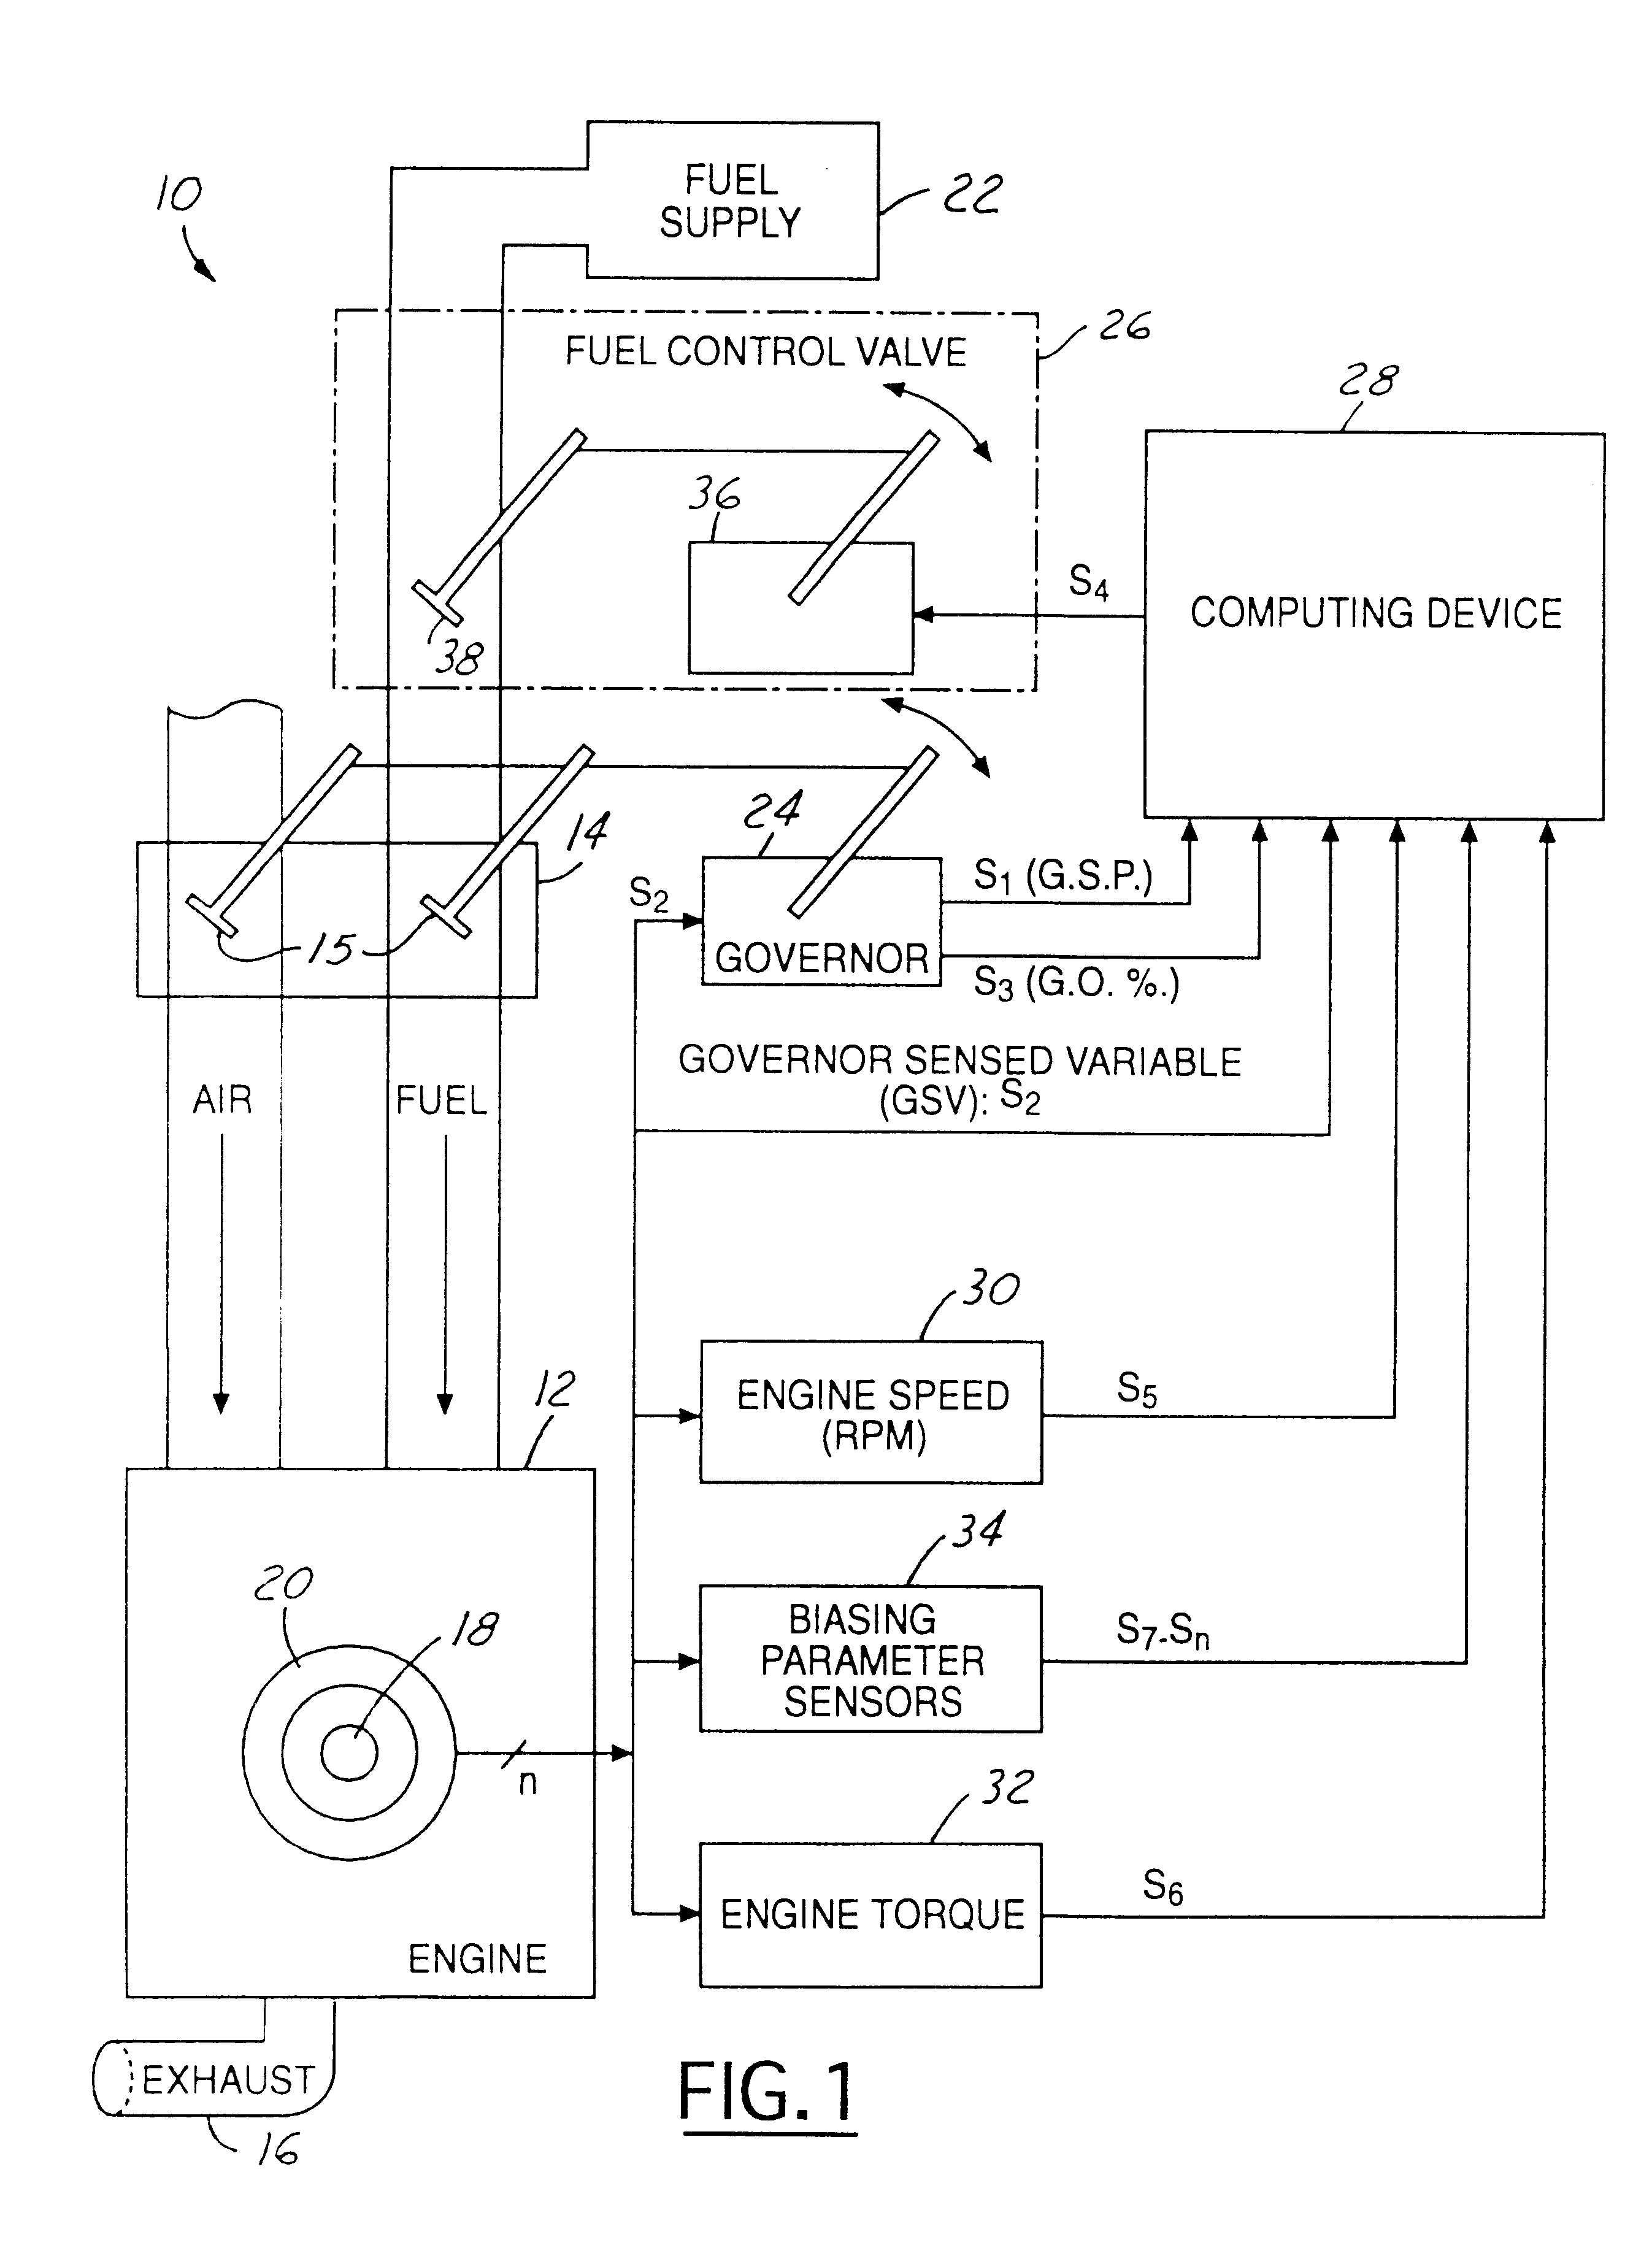 Method and system for controlling an air-to-fuel ratio in a non-stoichiometric power governed gaseous-fueled stationary internal combustion engine